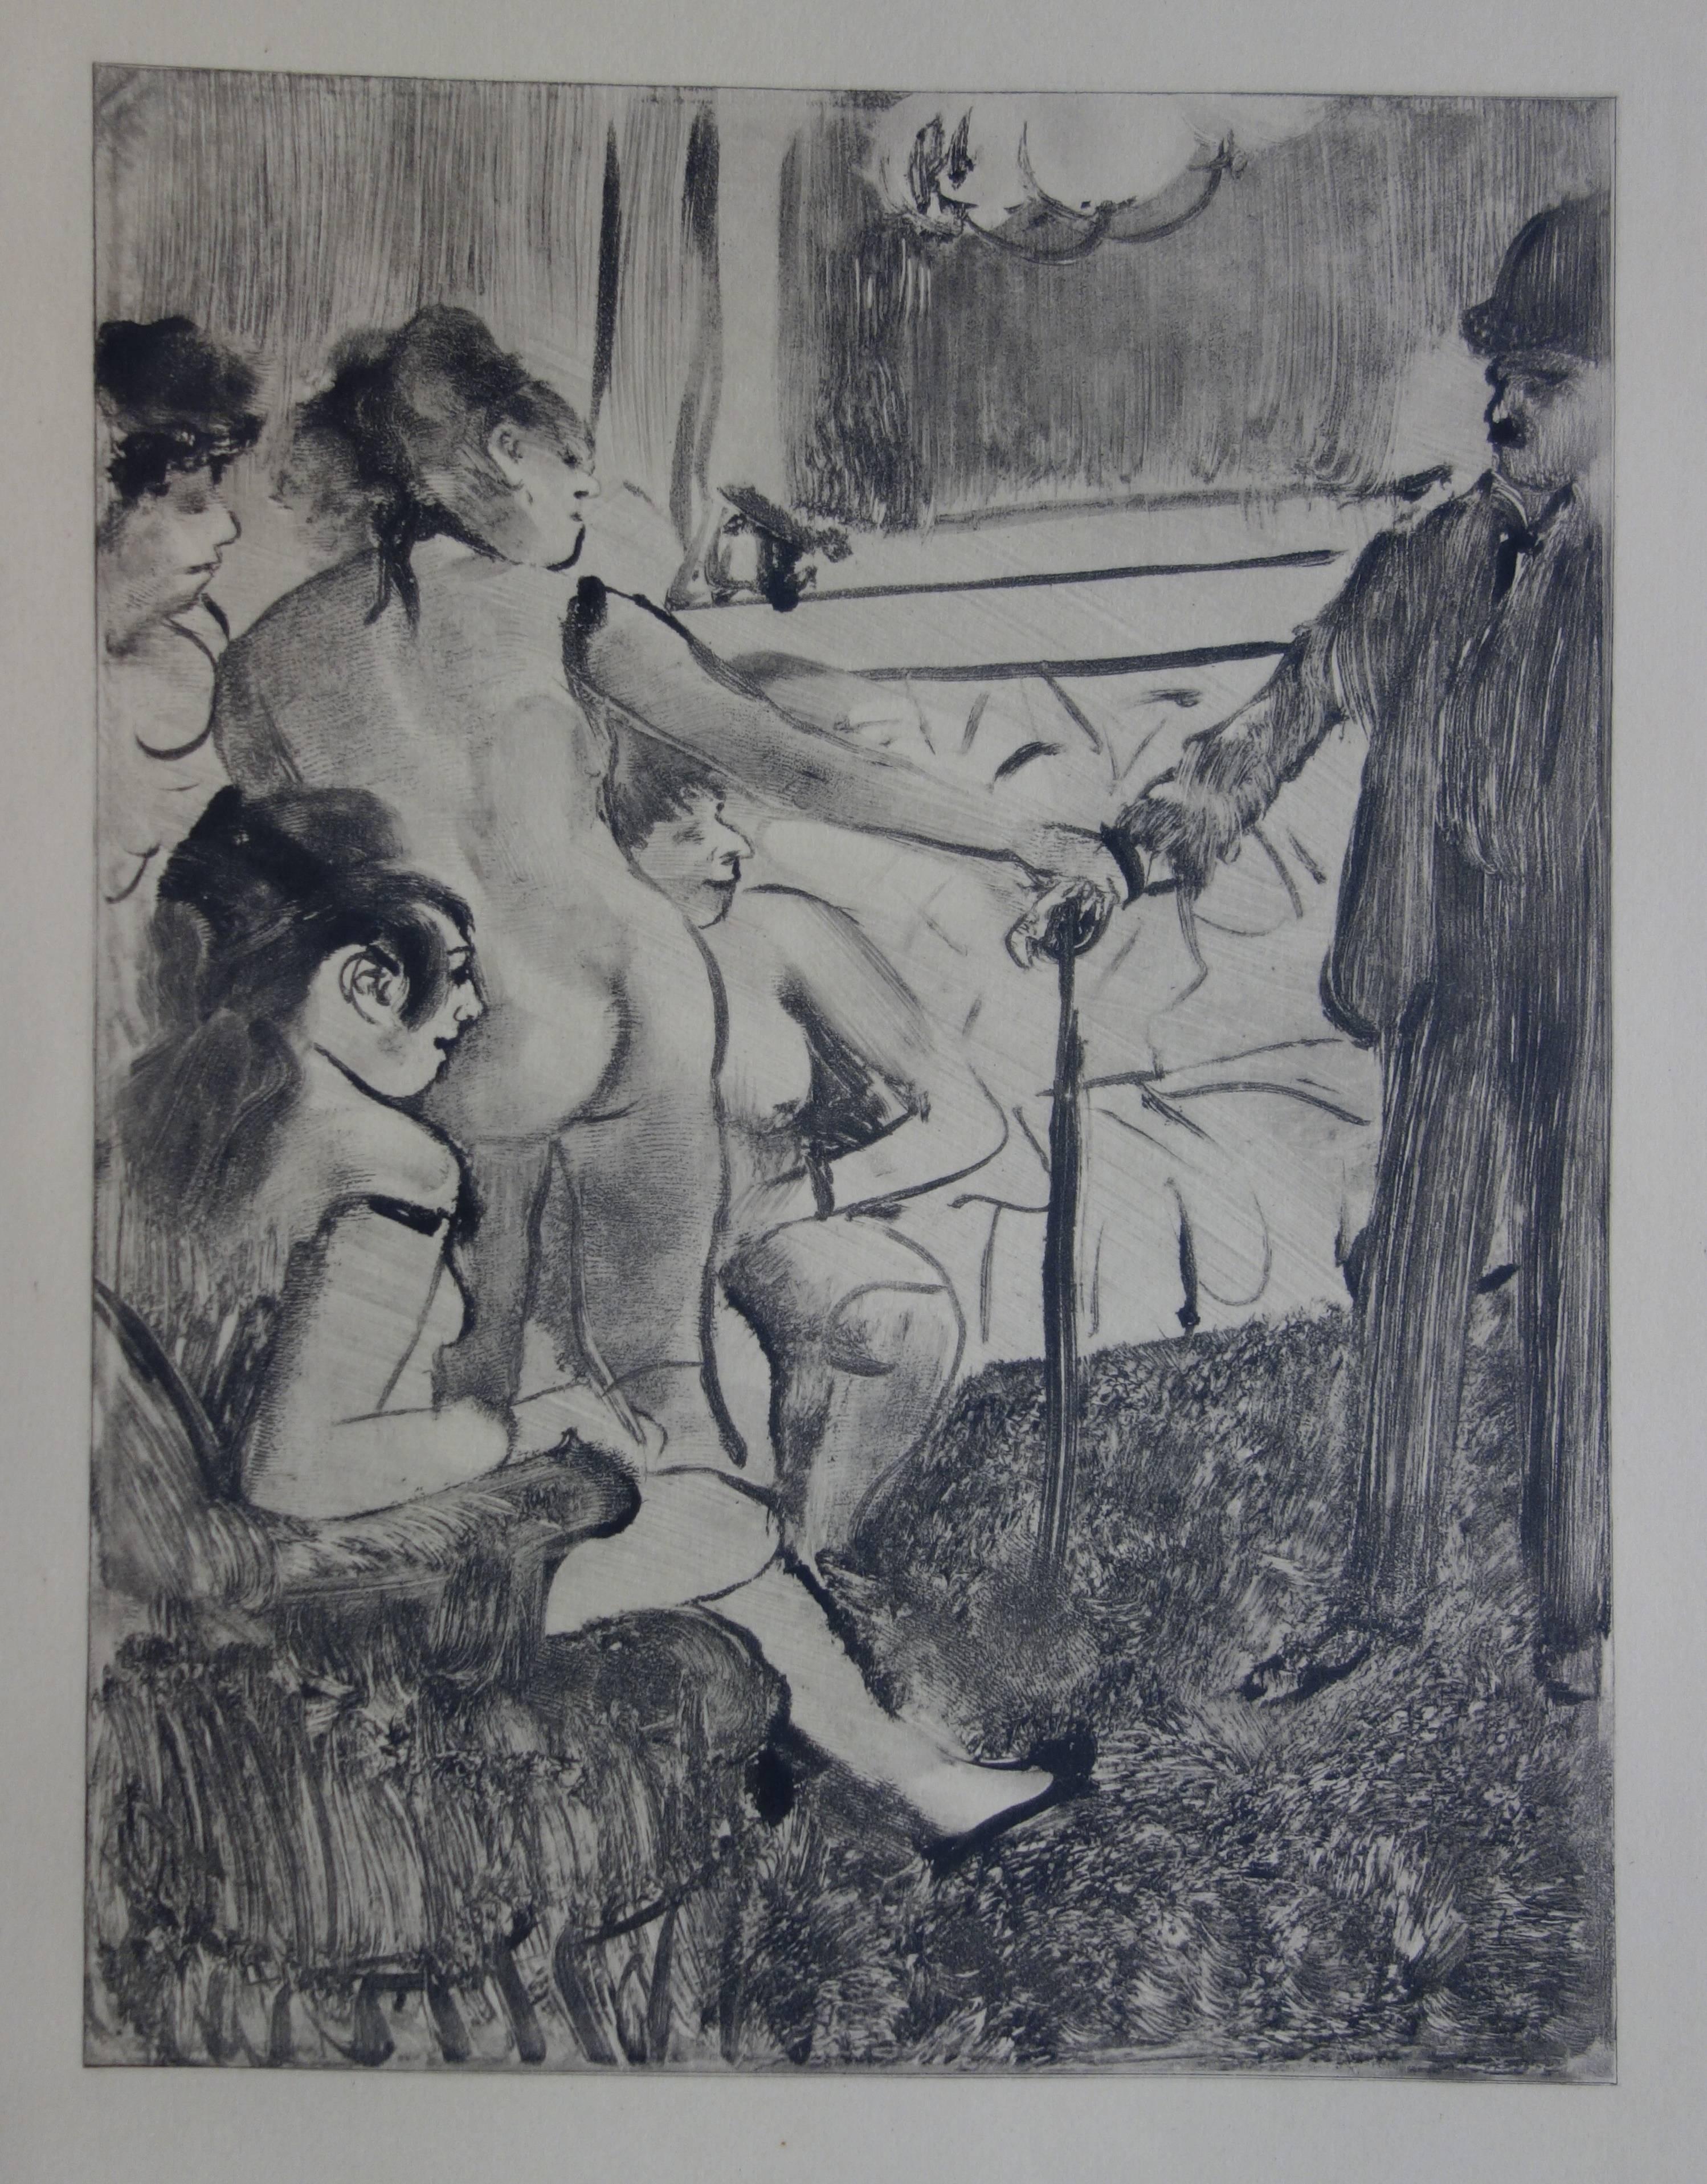 Whorehouse Scene : A Shy Client - Original etching